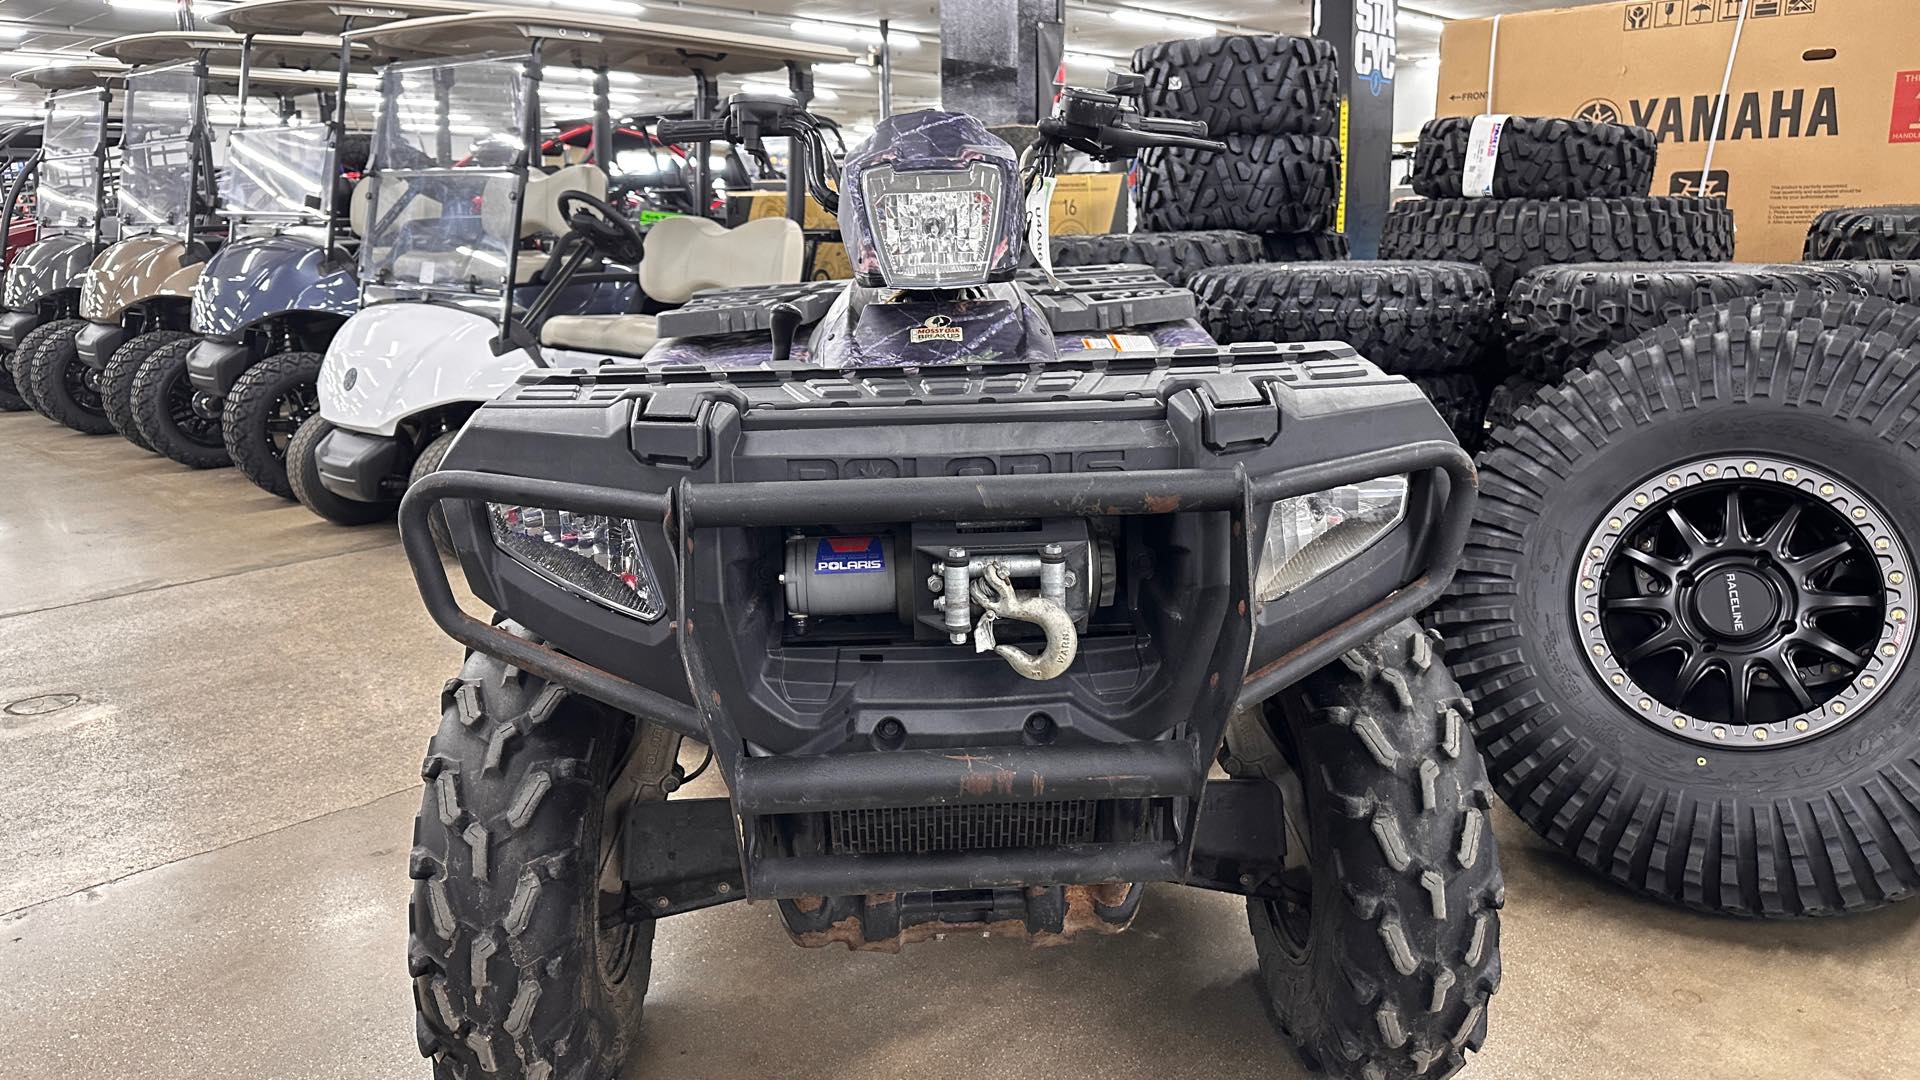 2006 Polaris Sportsman 700 Twin at ATVs and More